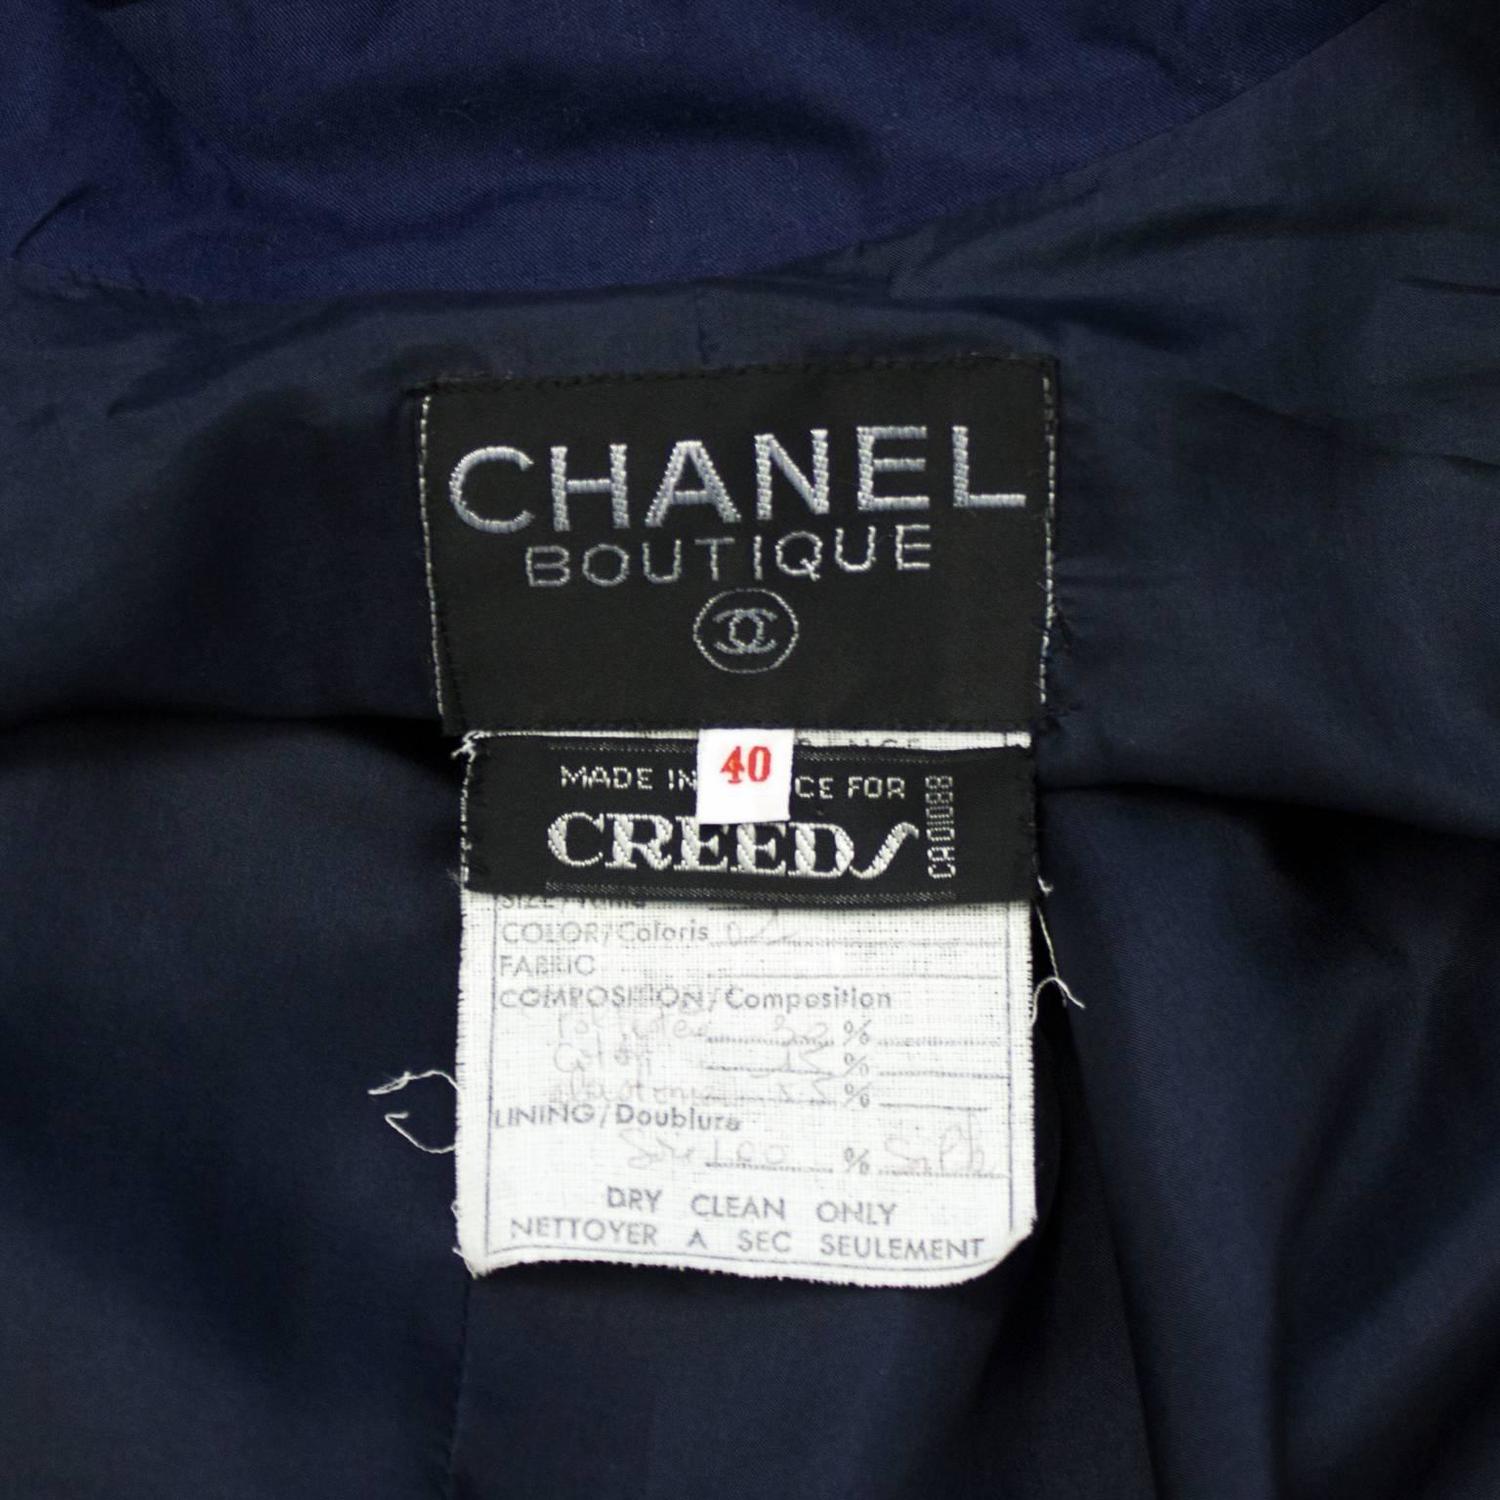 1980's Chanel Navy Trench For Sale at 1stdibs